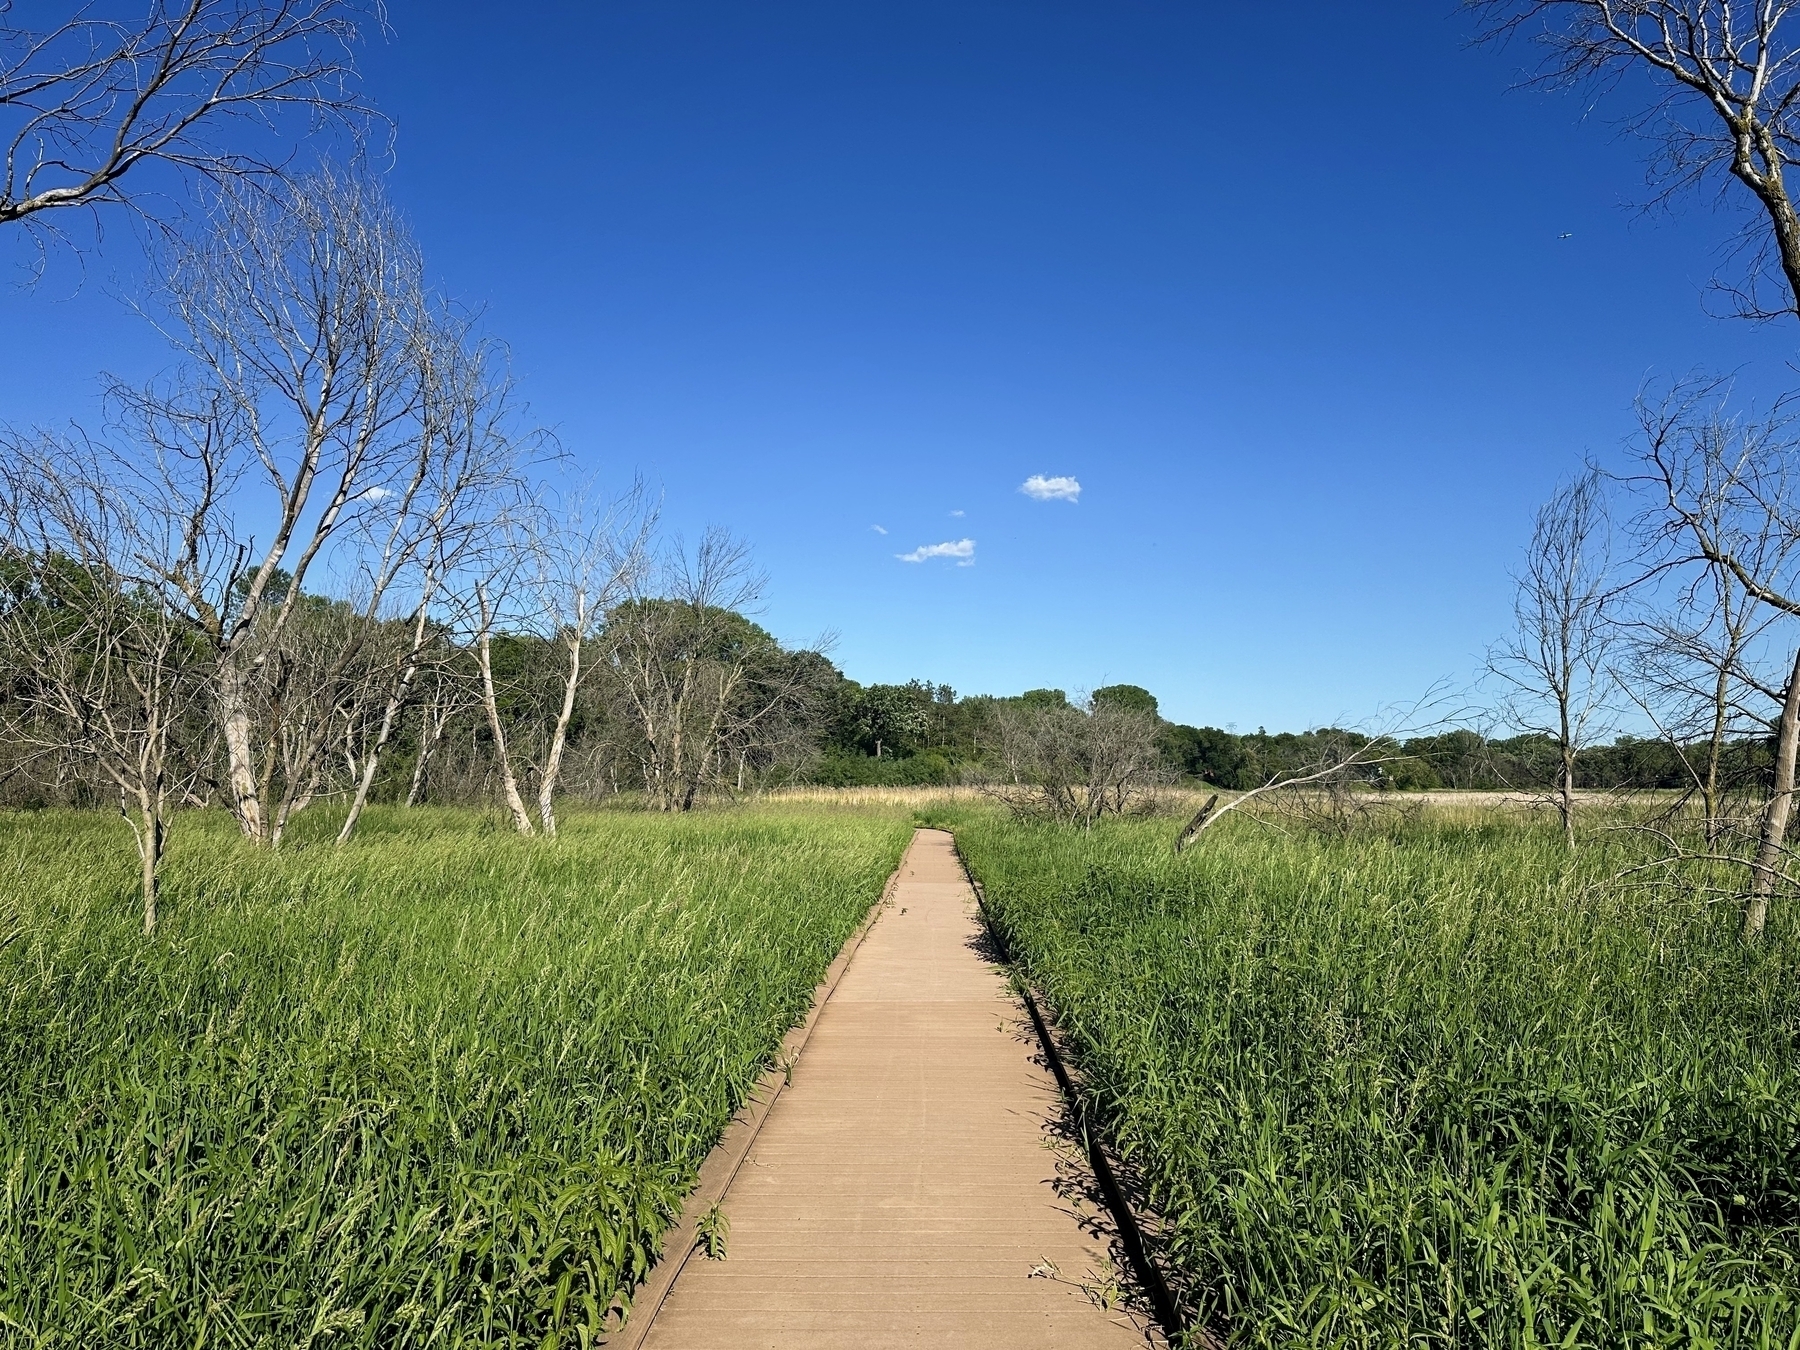 A narrow concrete path stretches straight across a grassy field flanked by leafless trees under a clear blue sky. Dense green vegetation surrounds the walkway with a forest in the background.